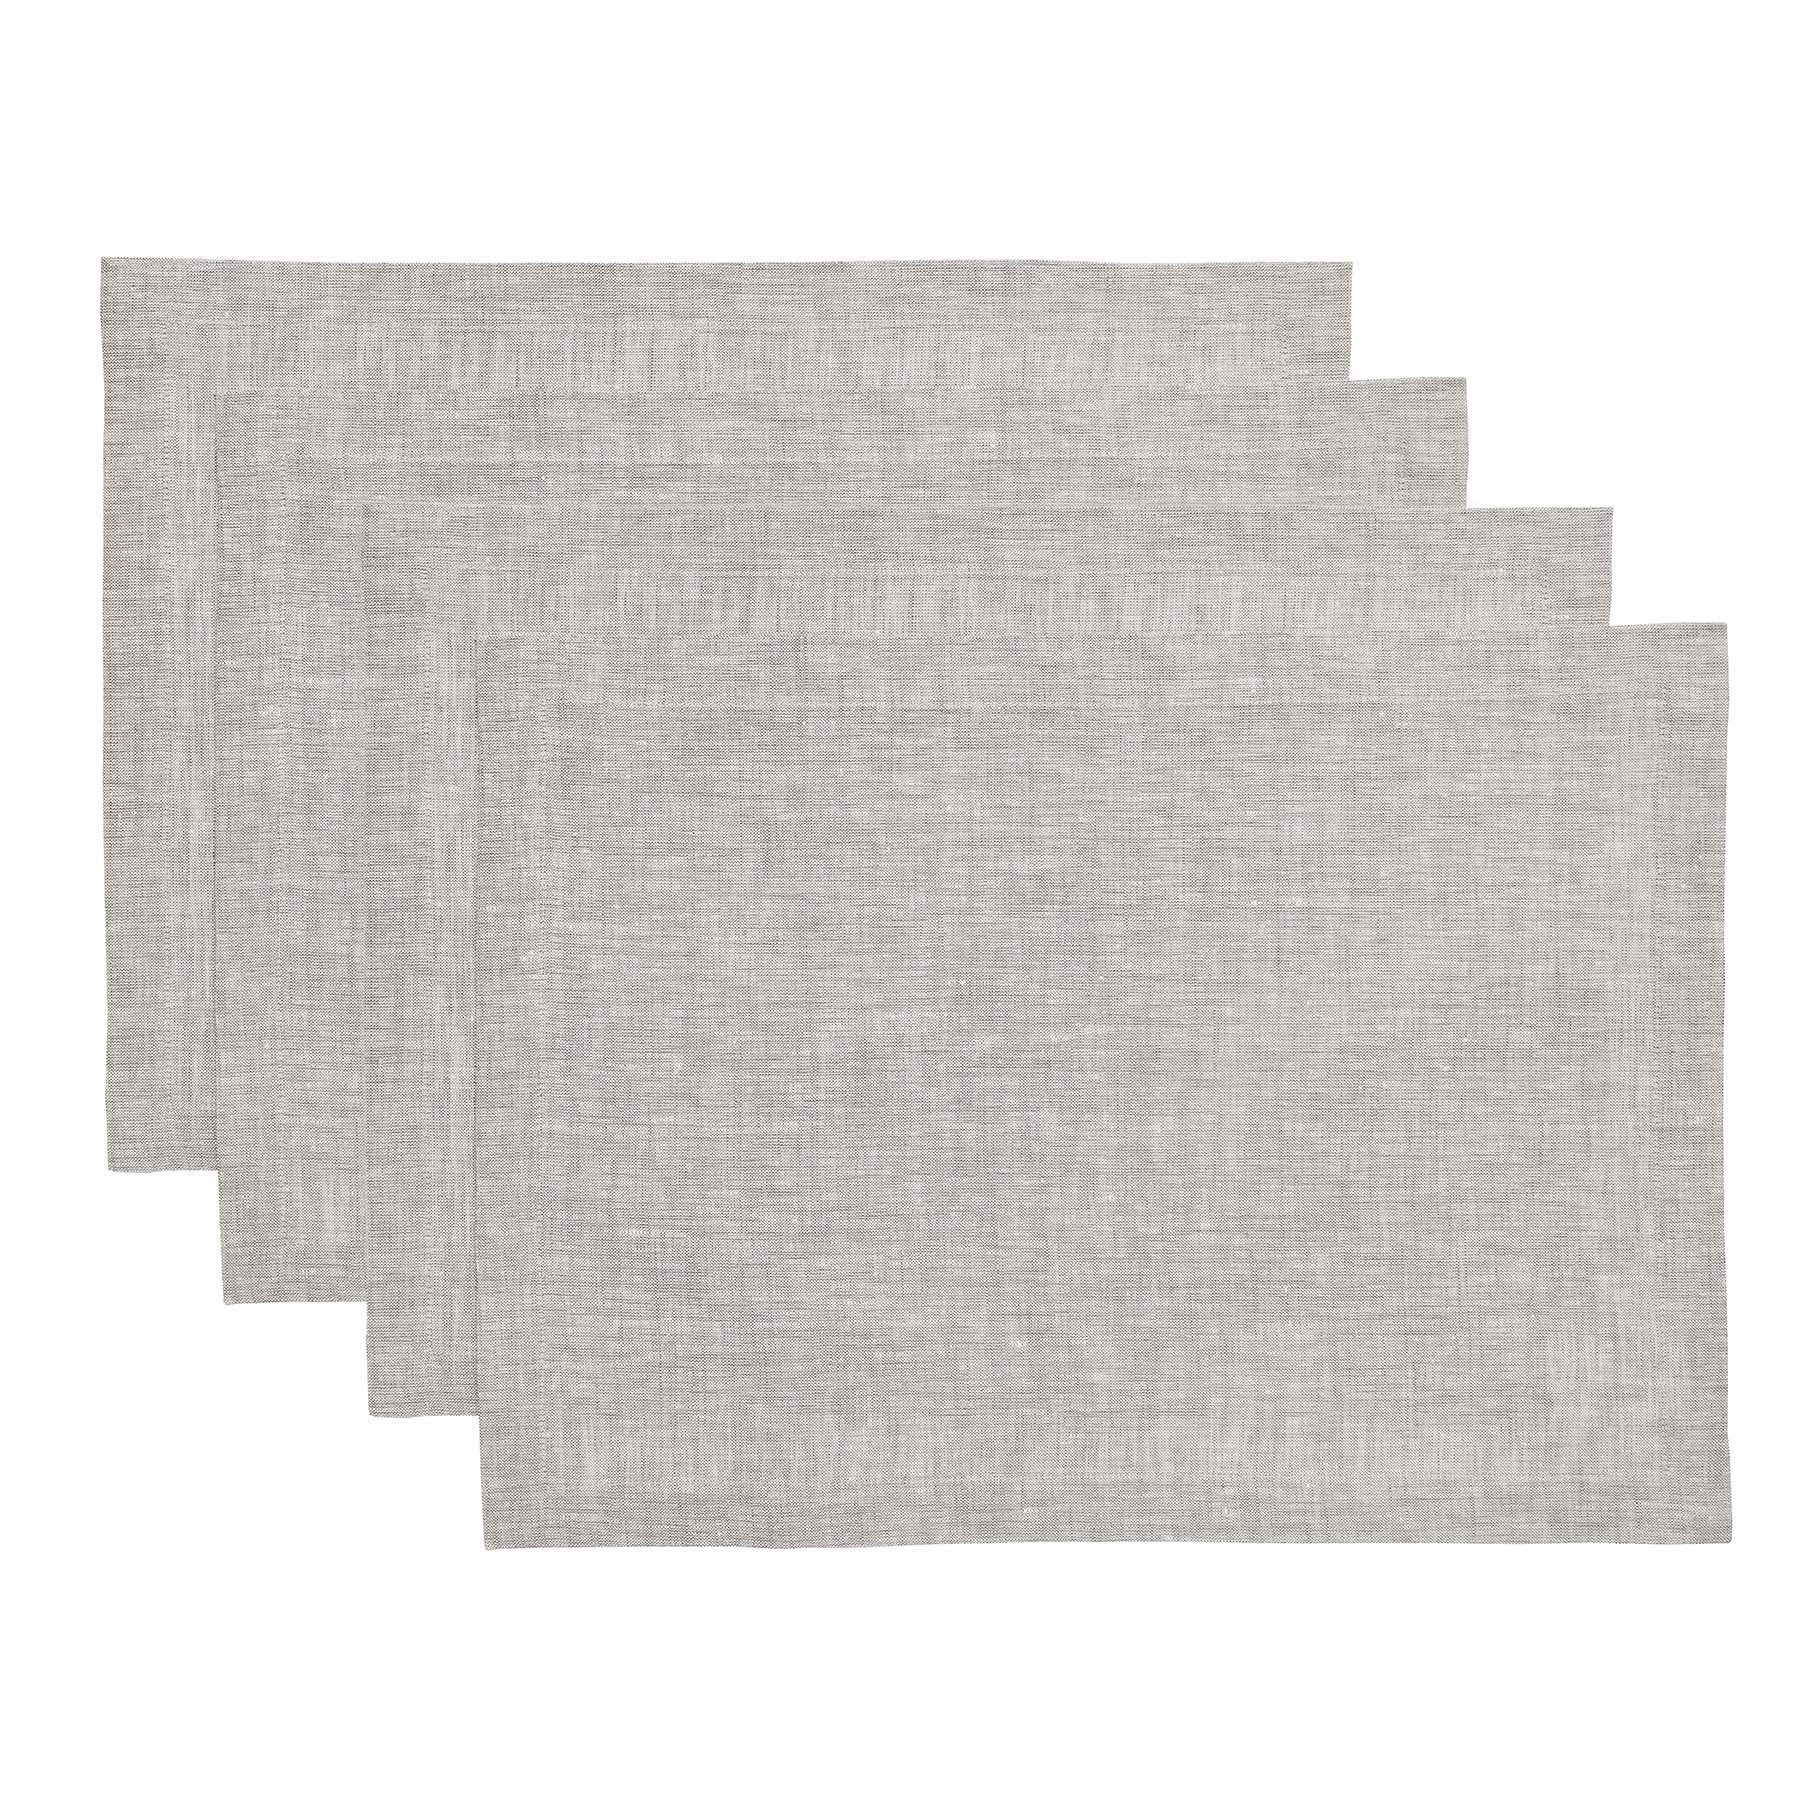 Provenza Cloth Placemats